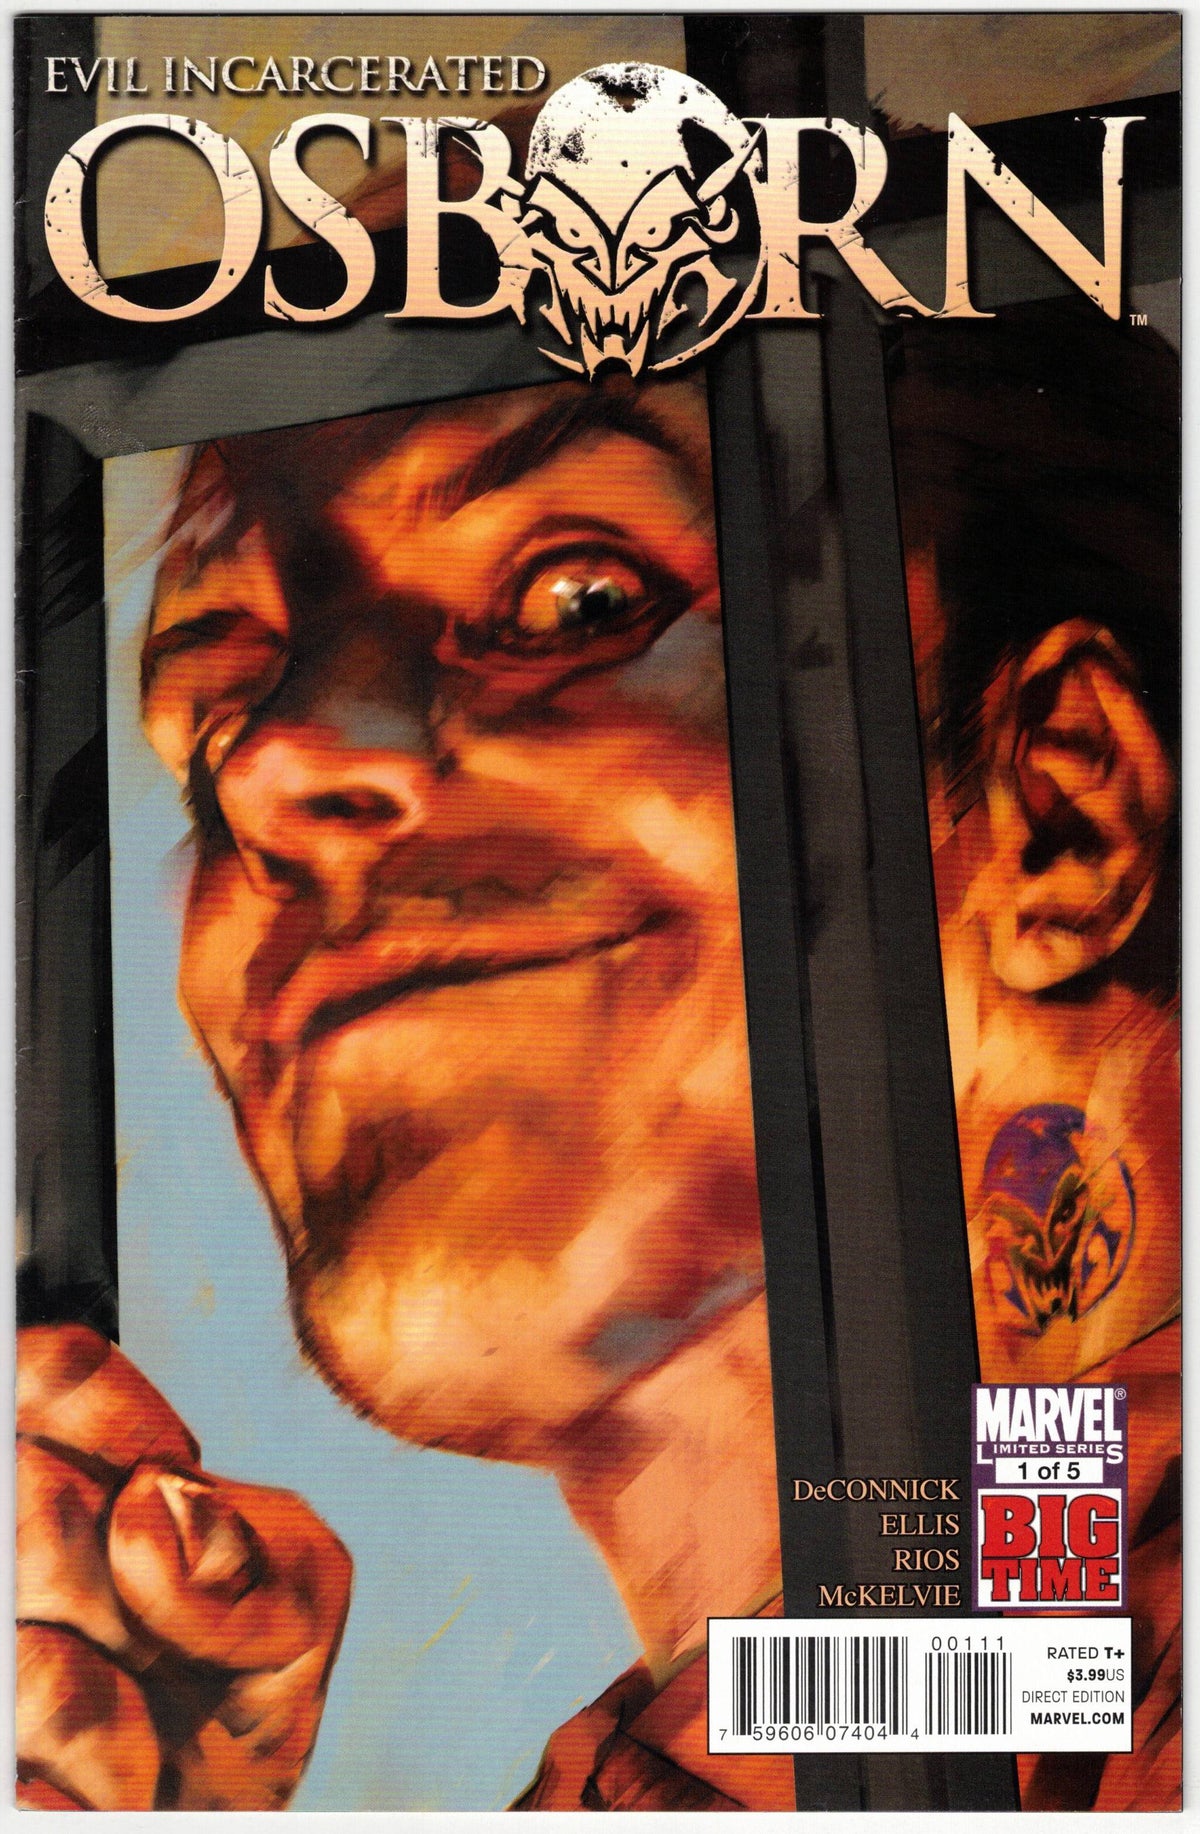 Photo of Osborn (2010) Issue 1A - Near Mint - Comic sold by Stronghold Collectibles